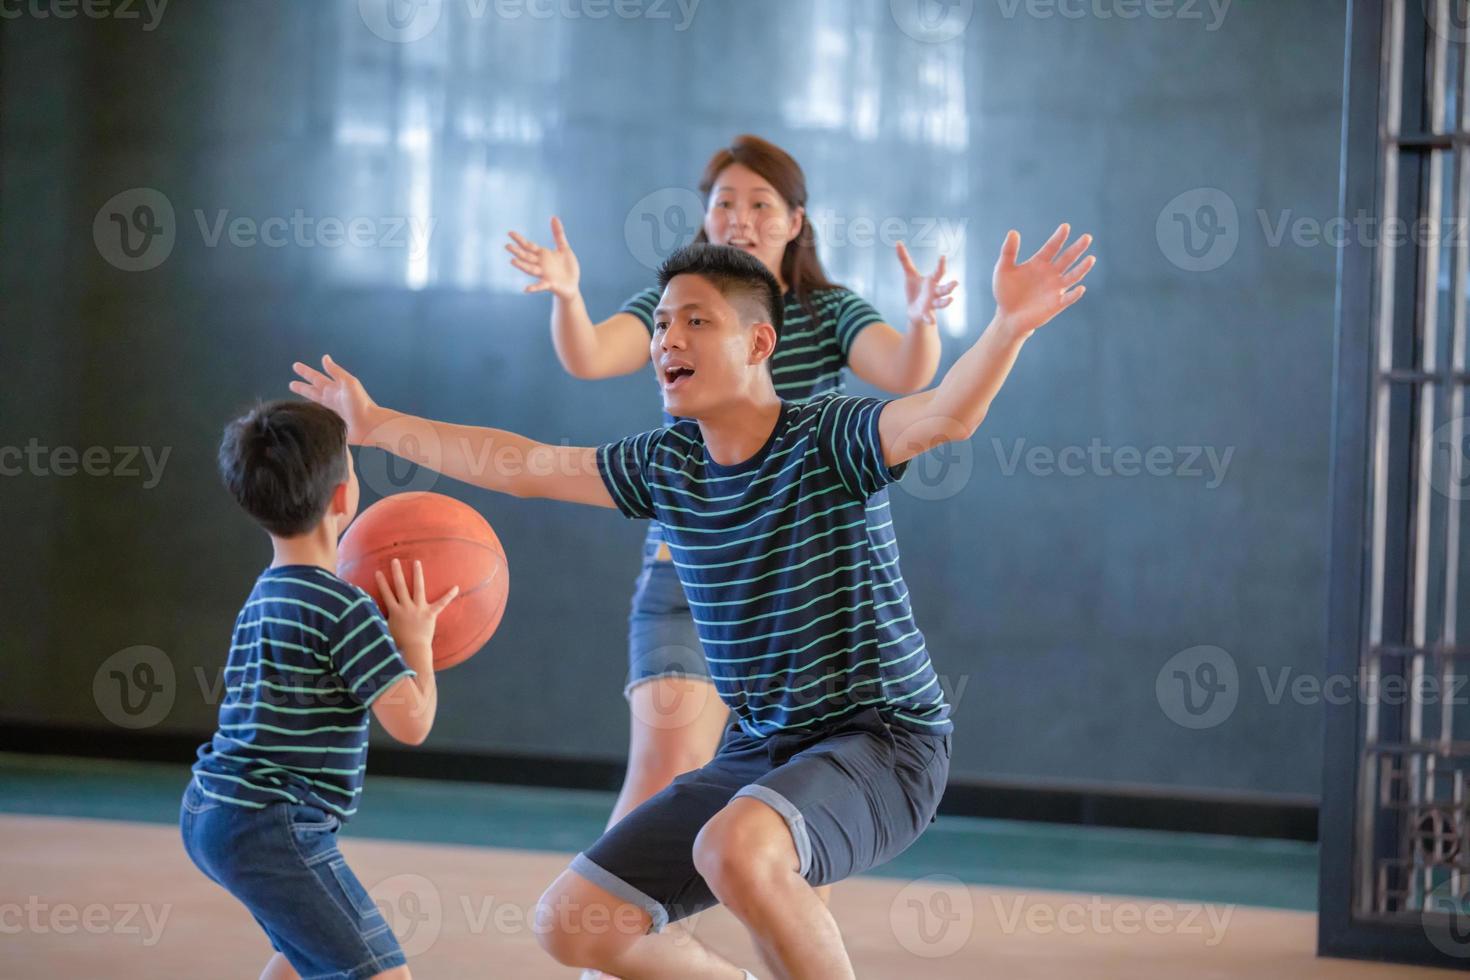 Asian family playing basketball together. Happy family spending free time together on holiday photo